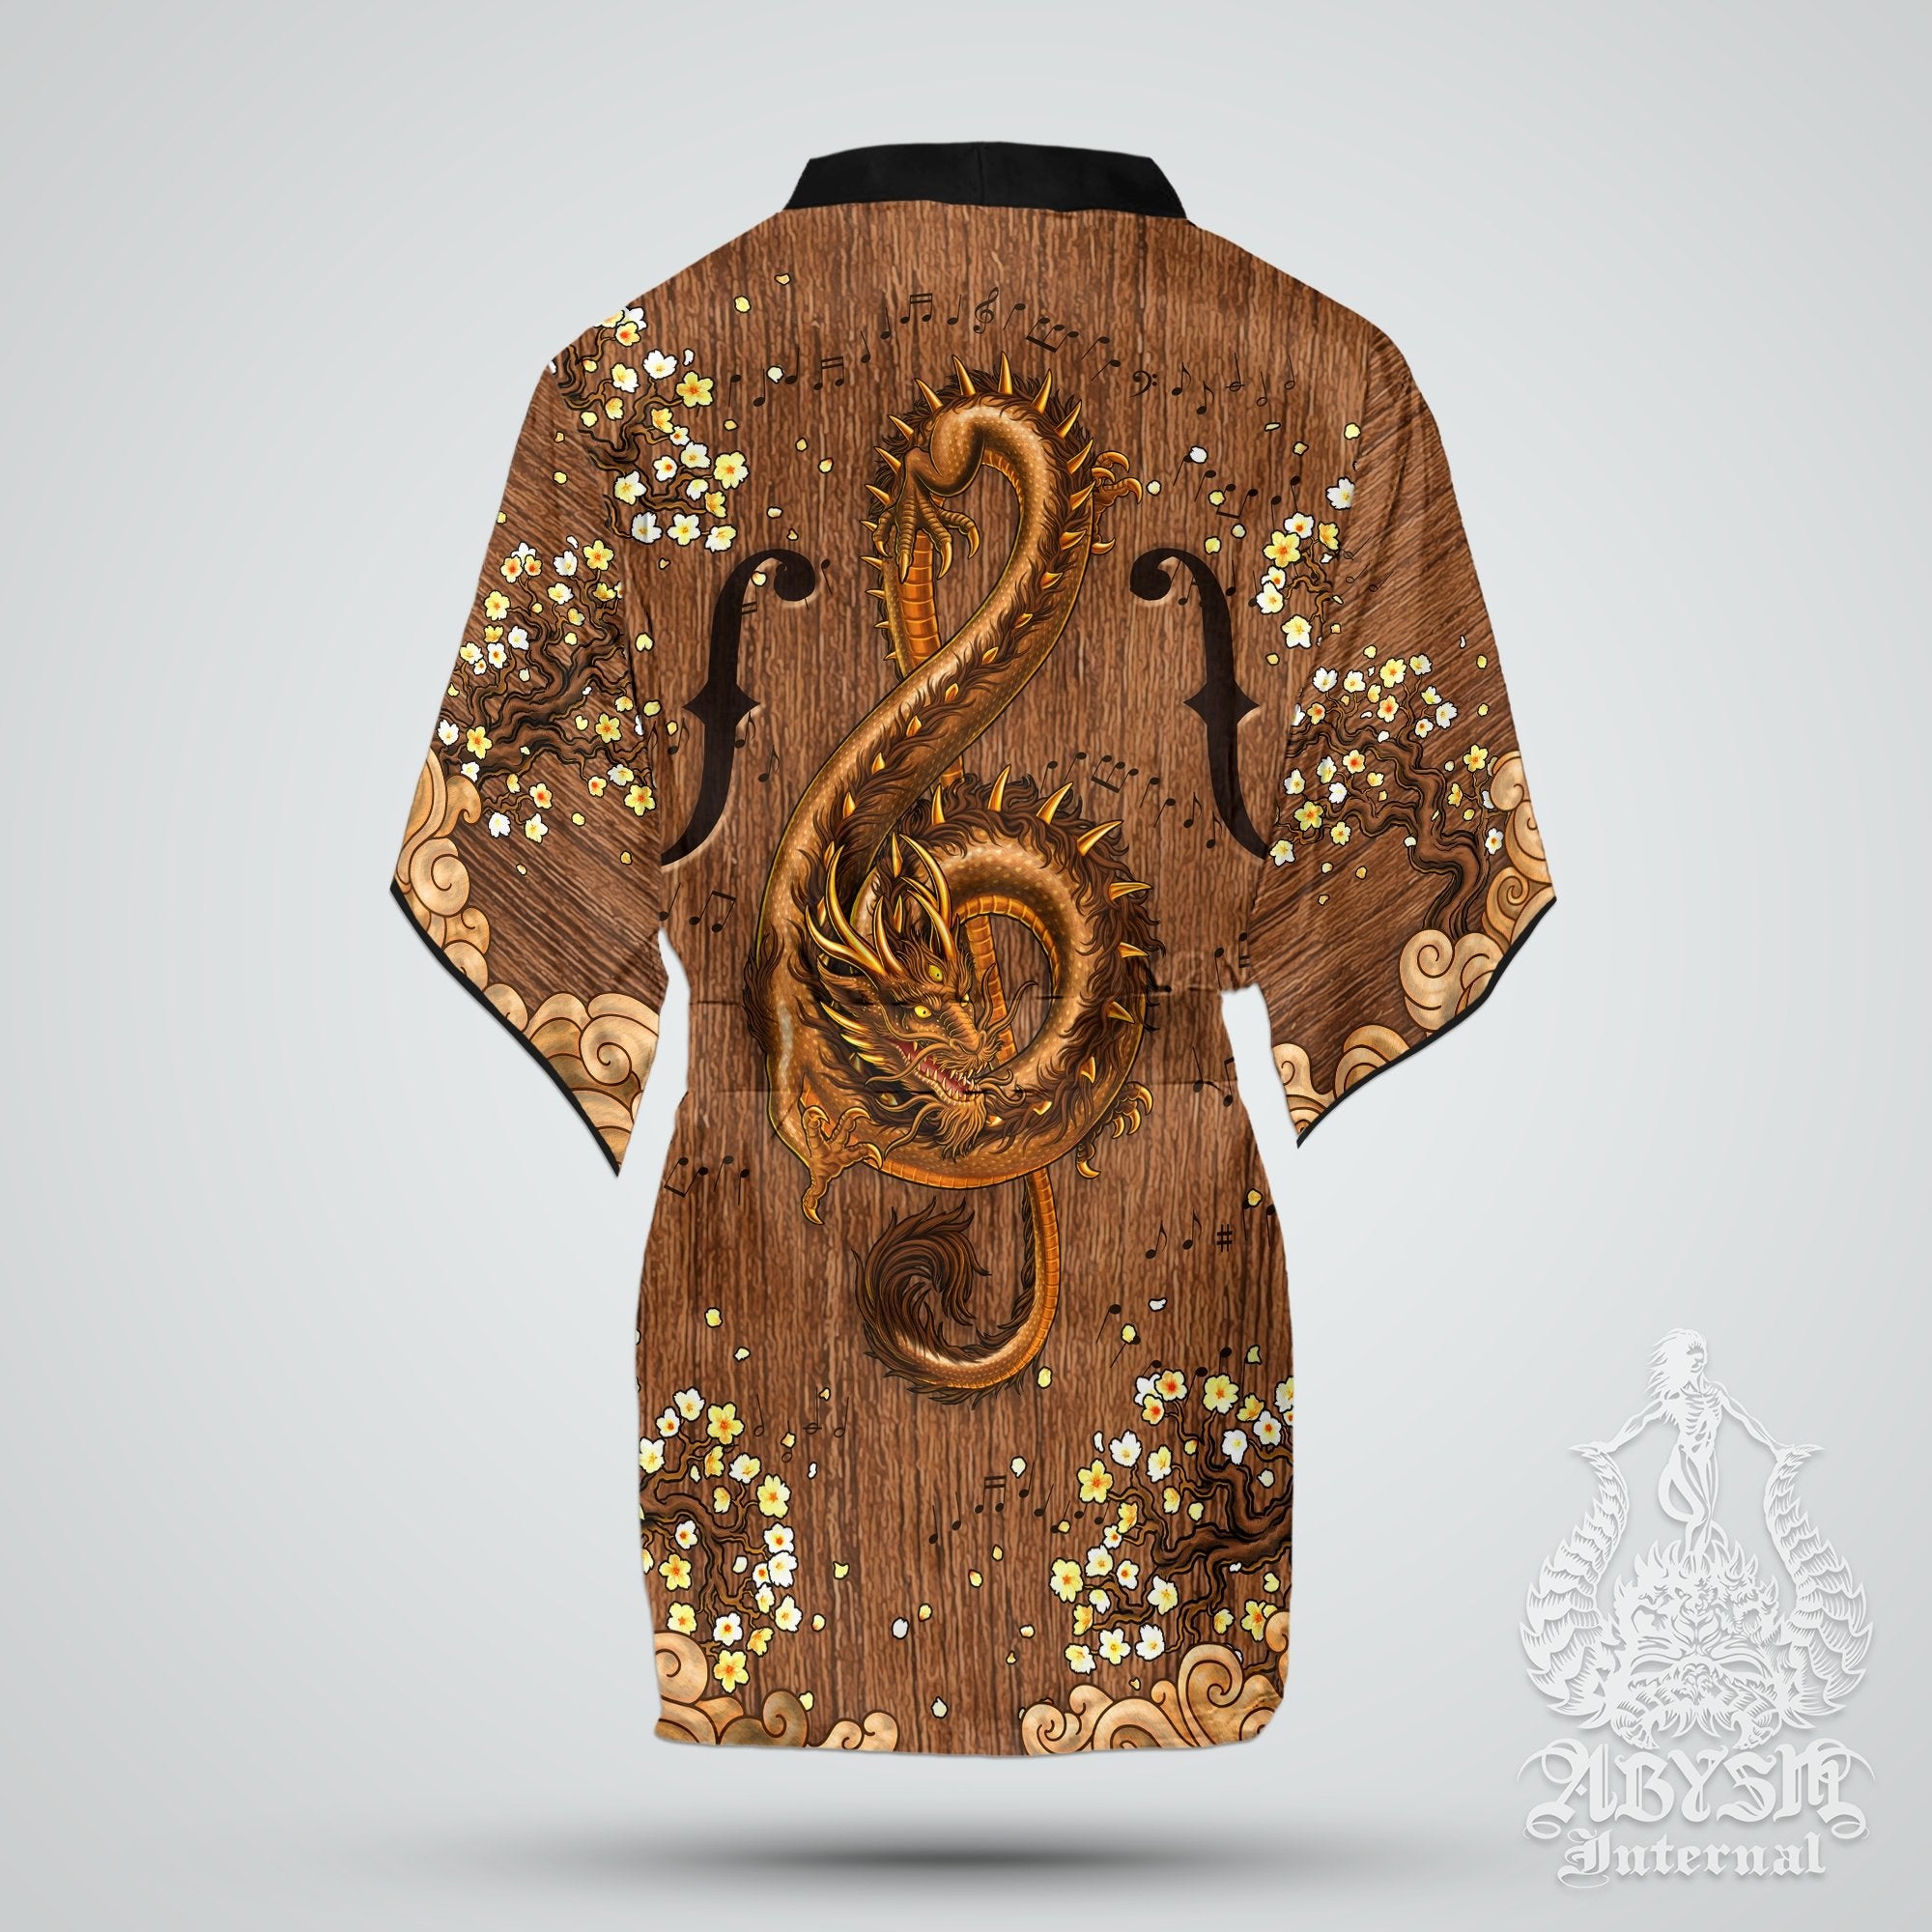 Music Cover Up, Beach Outfit, Party Kimono, Summer Festival Robe, Boho Indie and Alternative Clothing, Unisex - Dragon, Wood - Abysm Internal